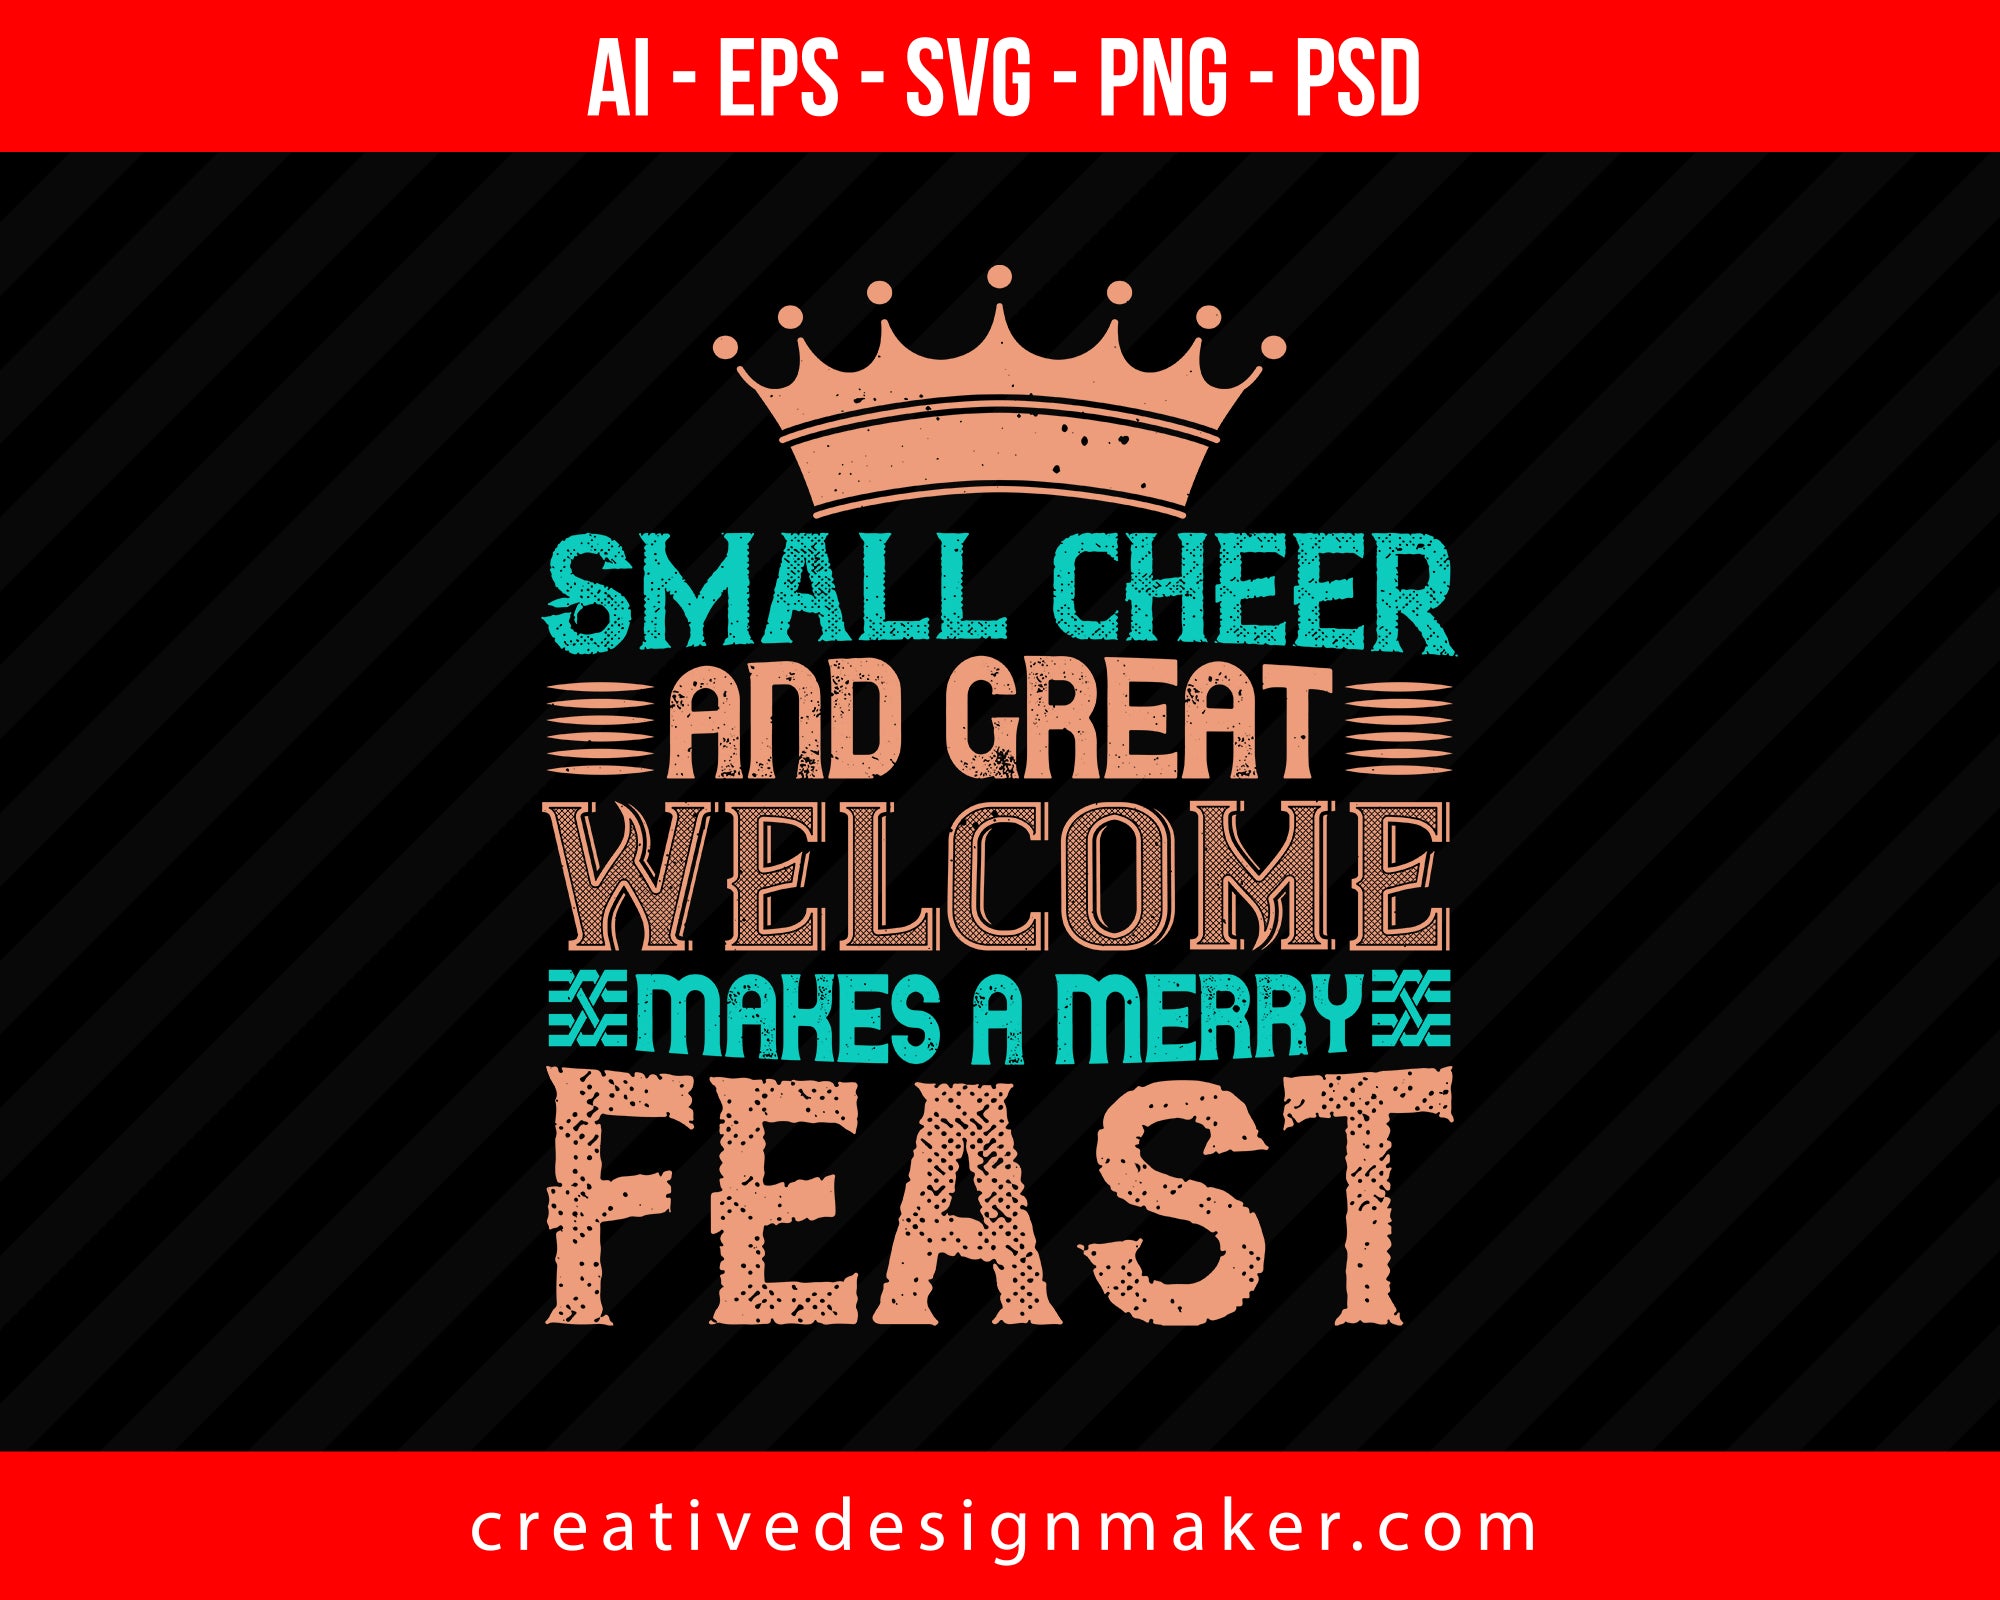 Small cheer and great welcome makes a merry feast Thanksgiving Print Ready Editable T-Shirt SVG Design!